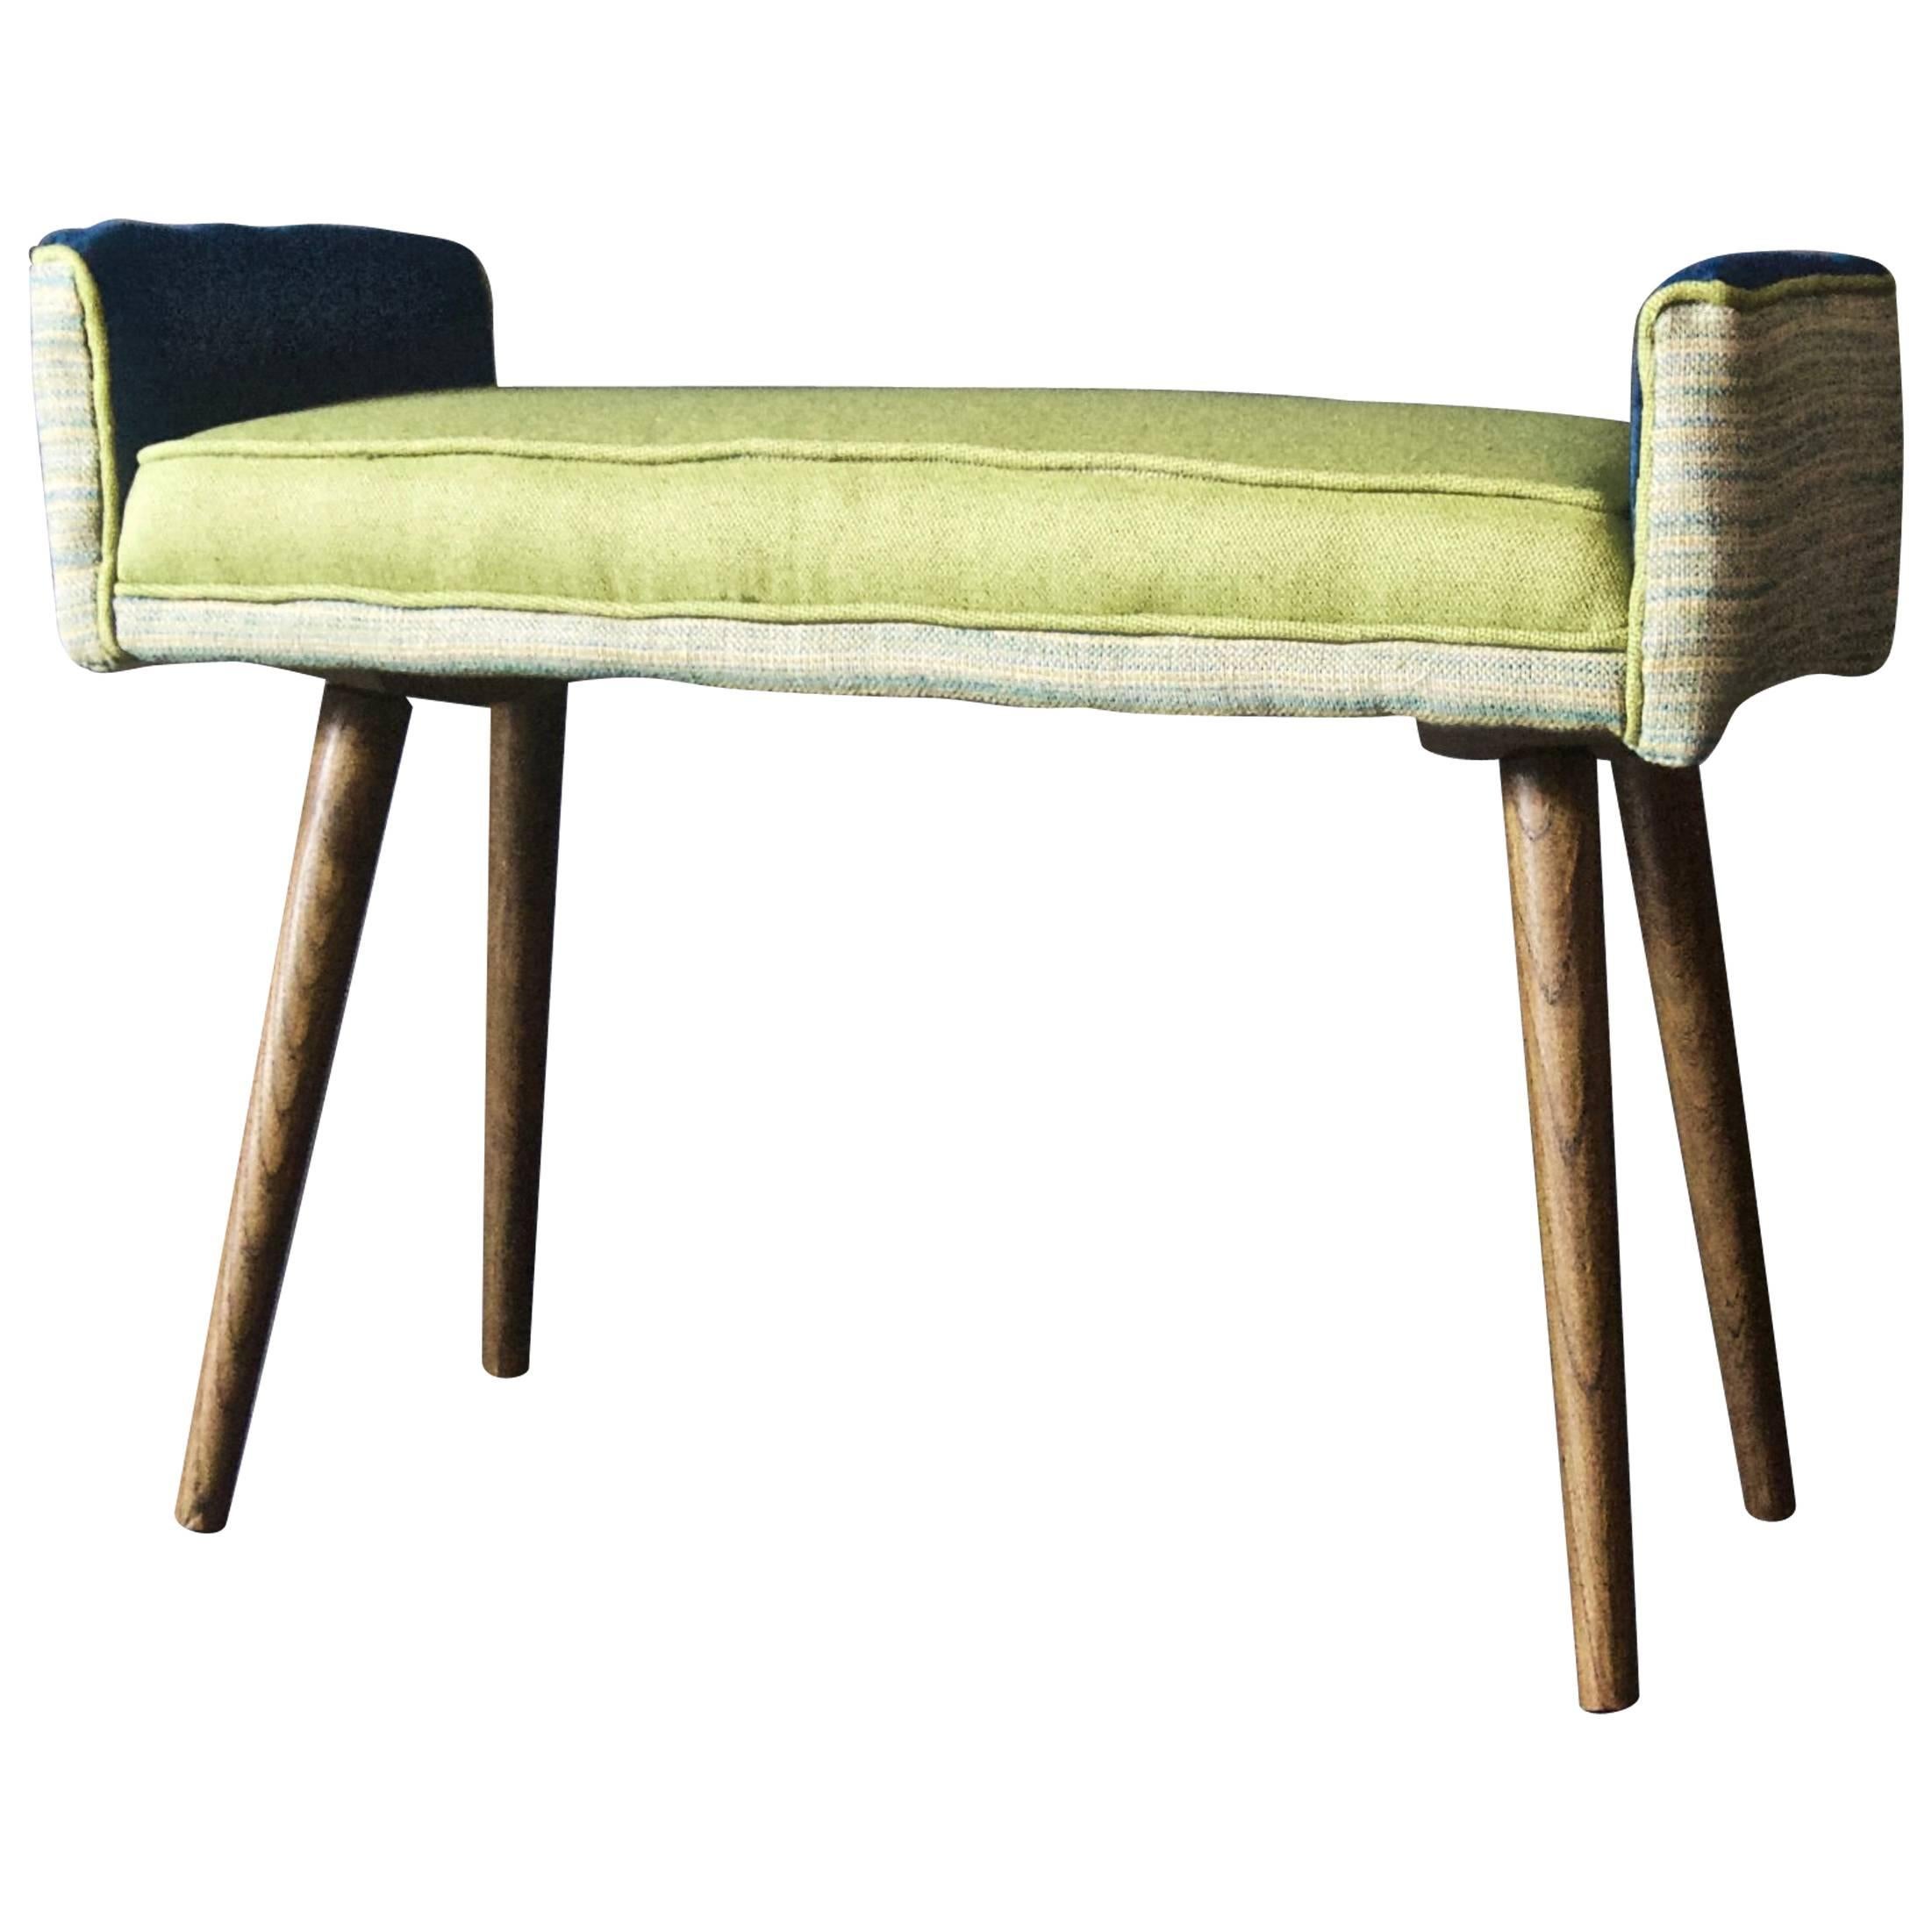 Studio Series: Backless Vanity Size Stool, Spring Linen Leaf Green Seat-in stock For Sale